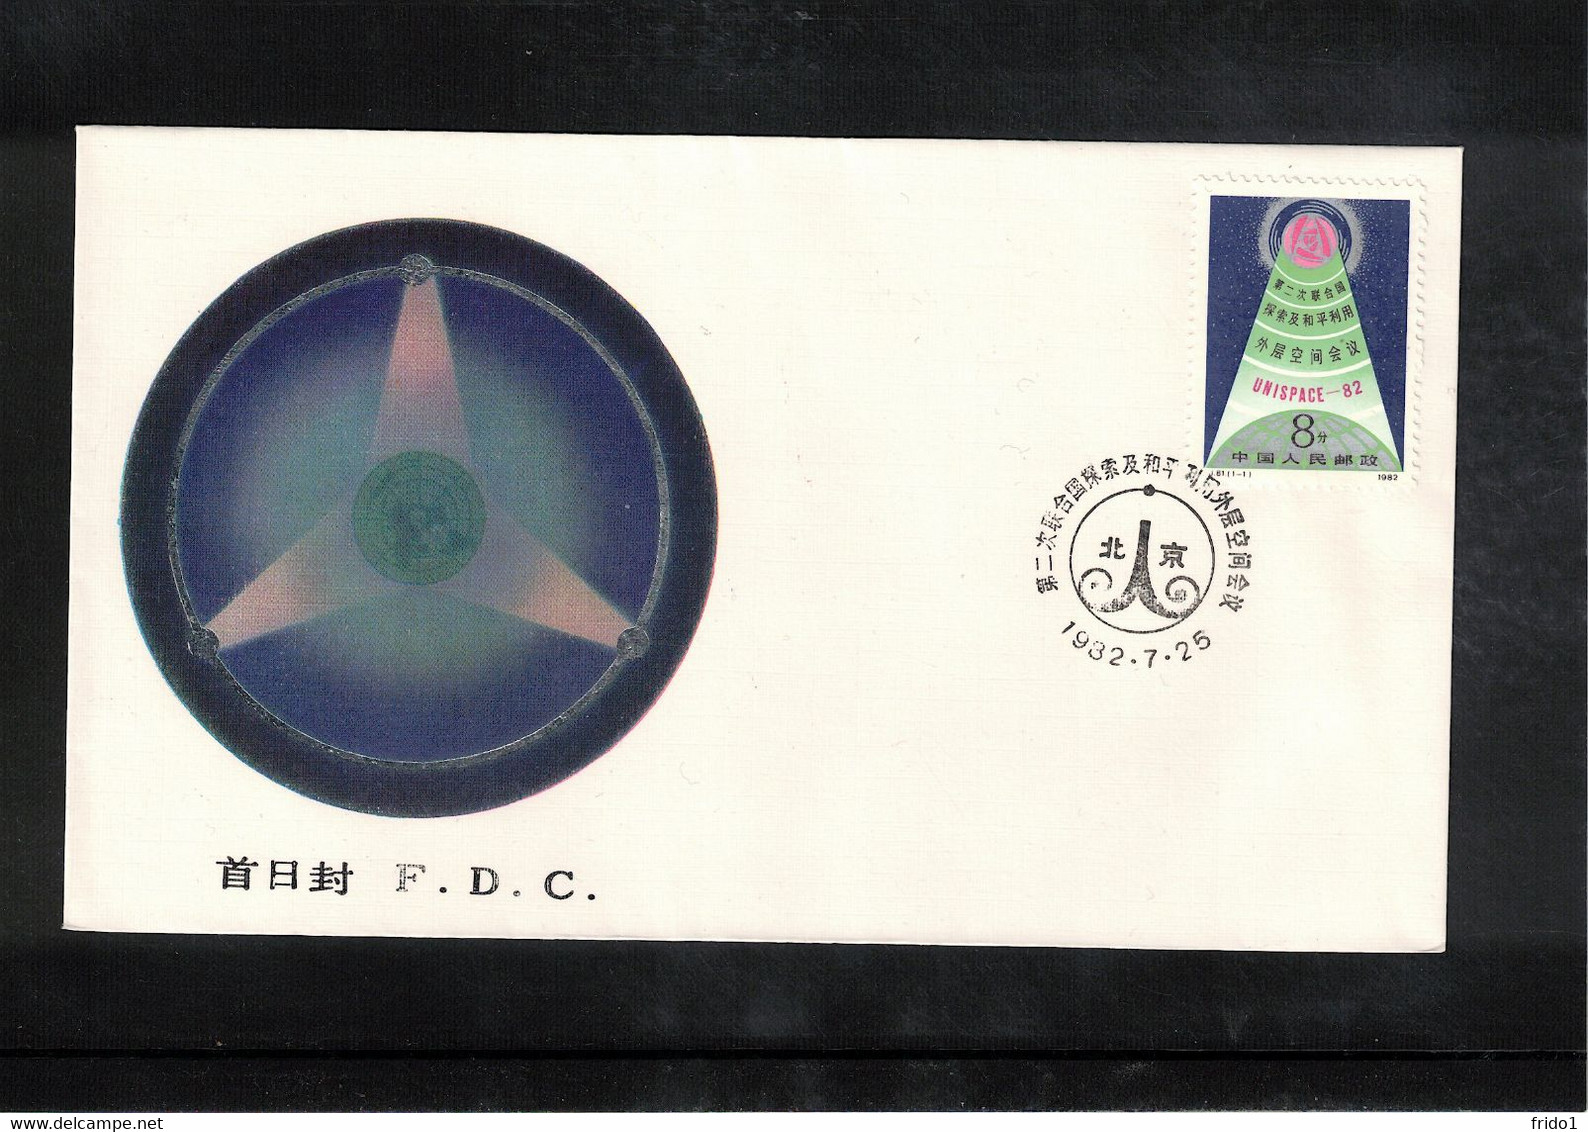 China 1982 Space / Raumfahrt UNISPACE Conference FDC - Asie